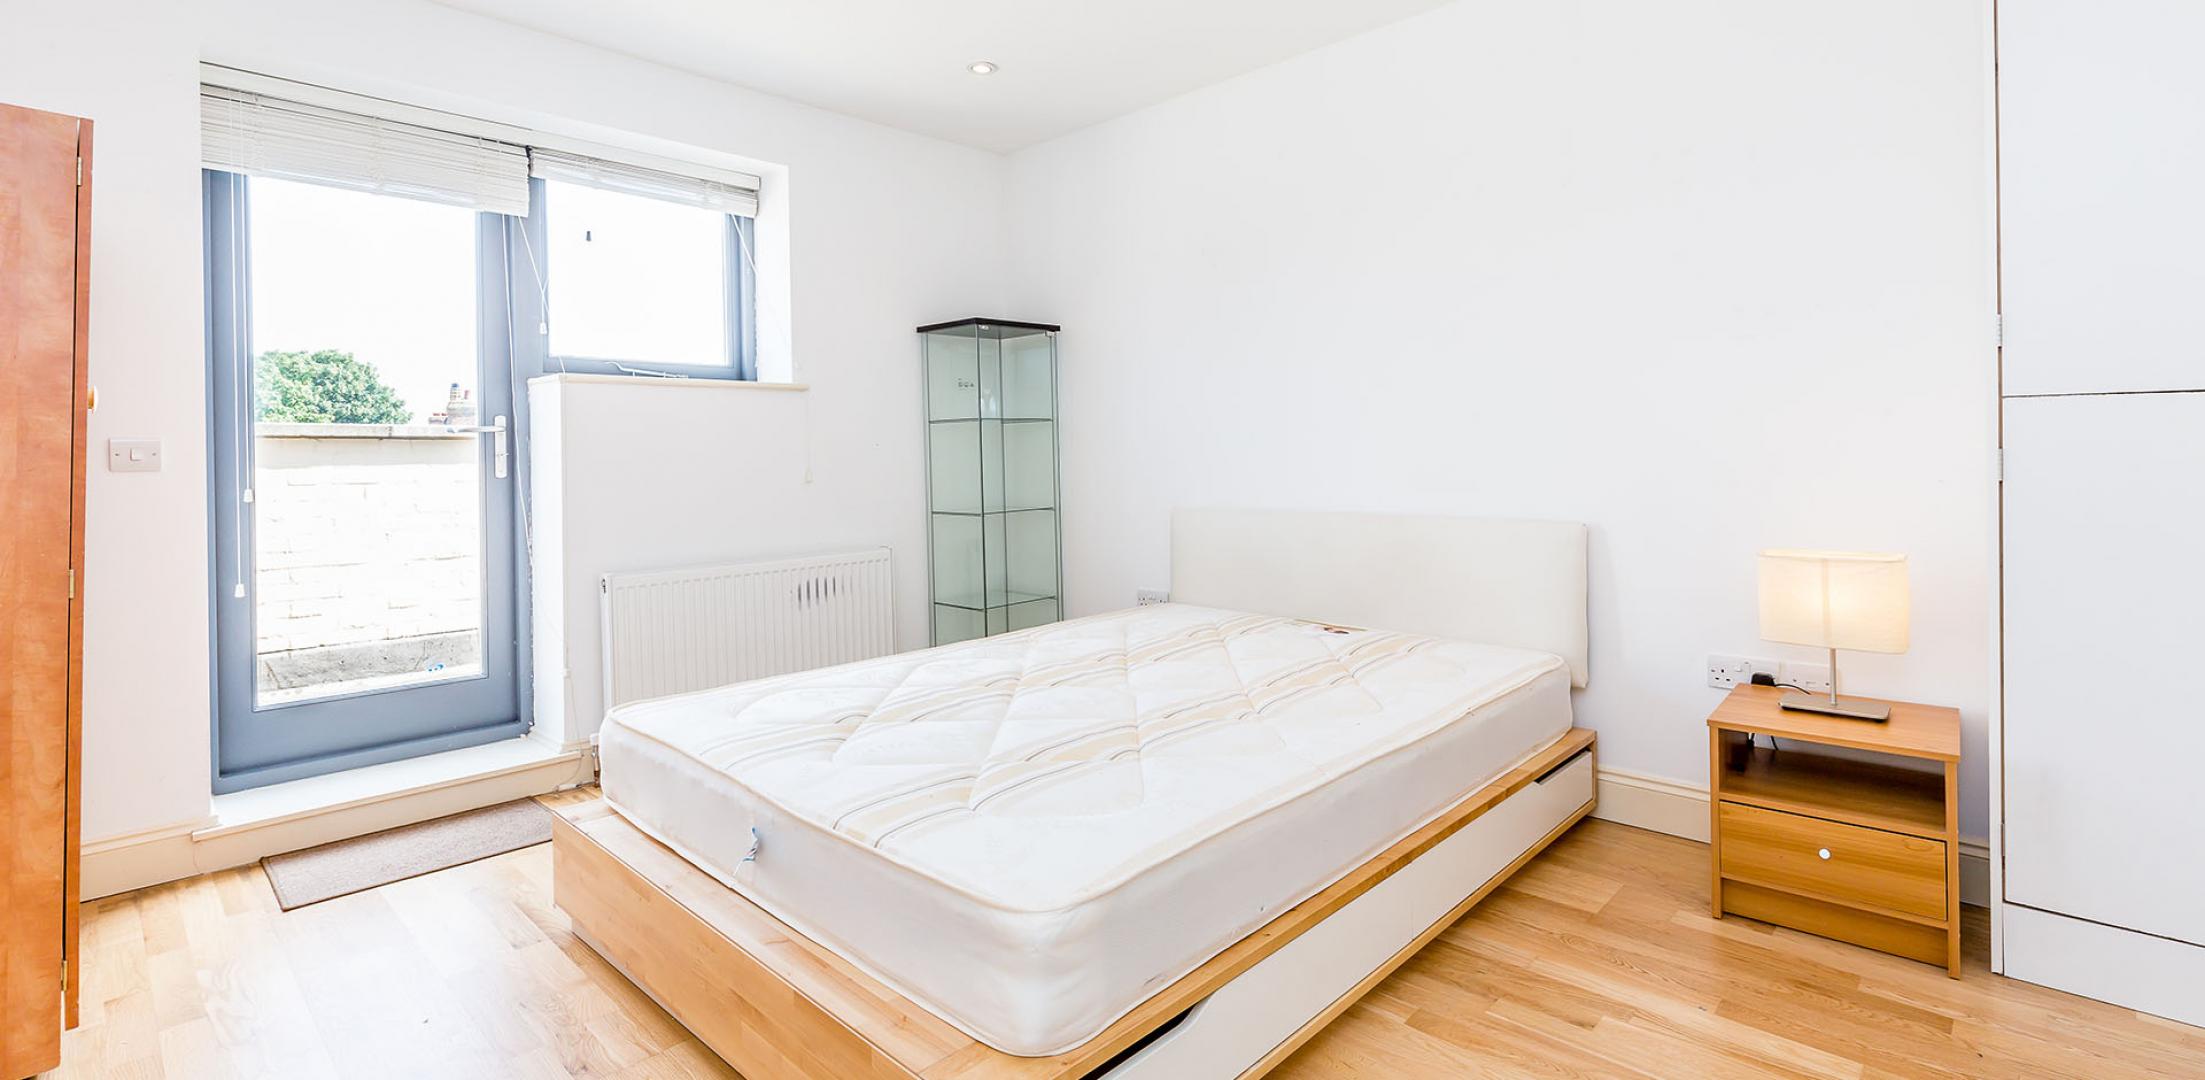 			Great 3 Double Bed Property !, 3 Bedroom, 2 bath, 1 reception Flat			 Myddleton Road, BOUNDS GREEN